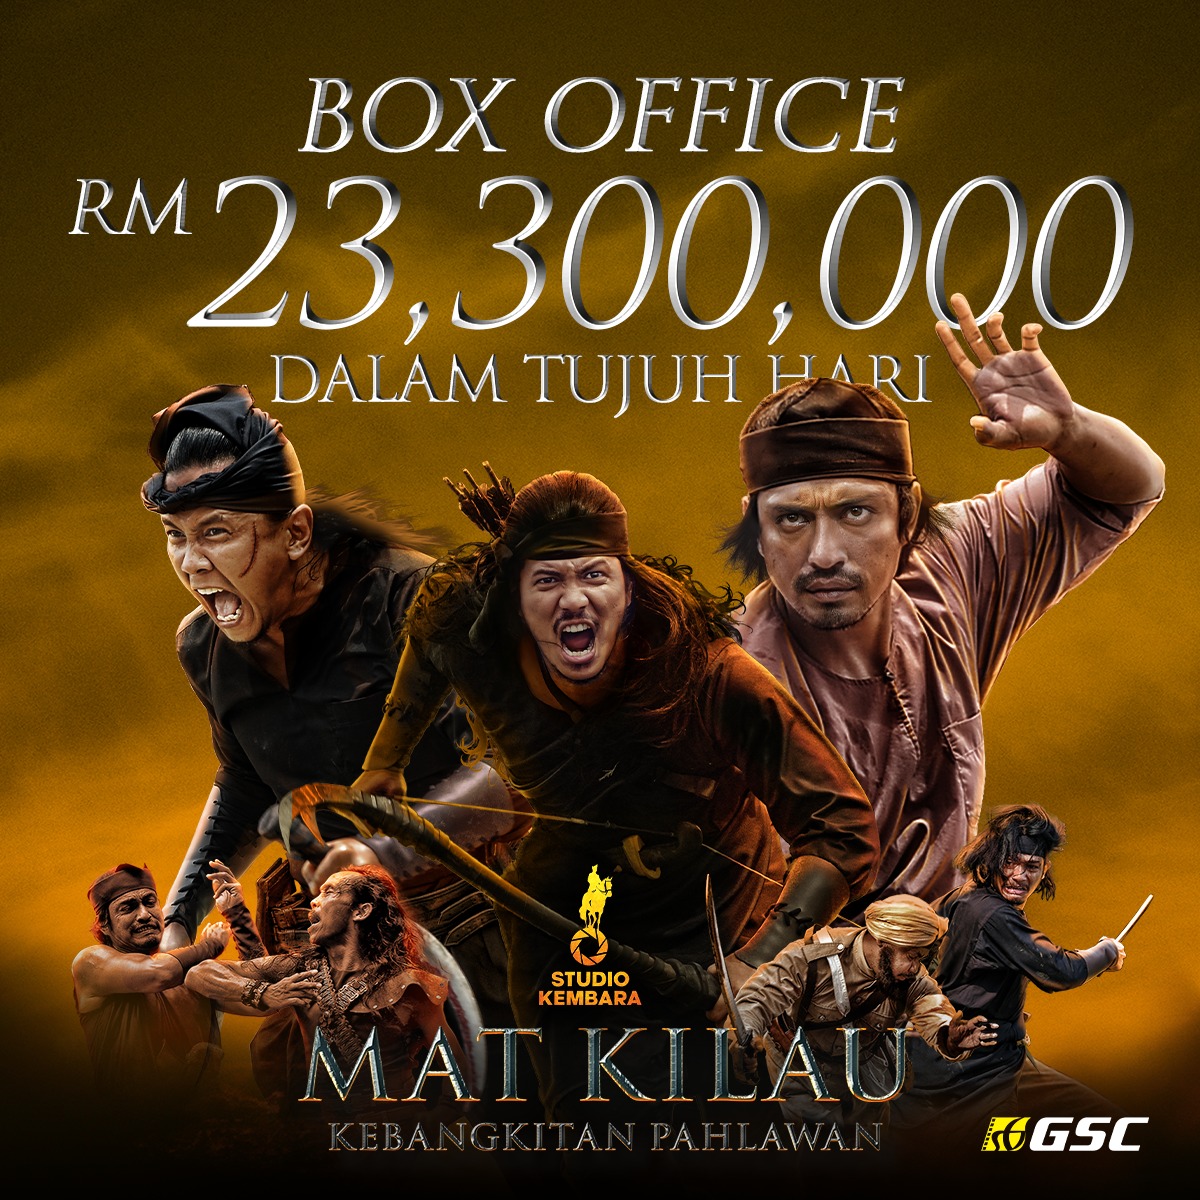 Malaysian blockbuster 'Mat Kilau' has proven to be a hit among local audiences. Image credit: GSC